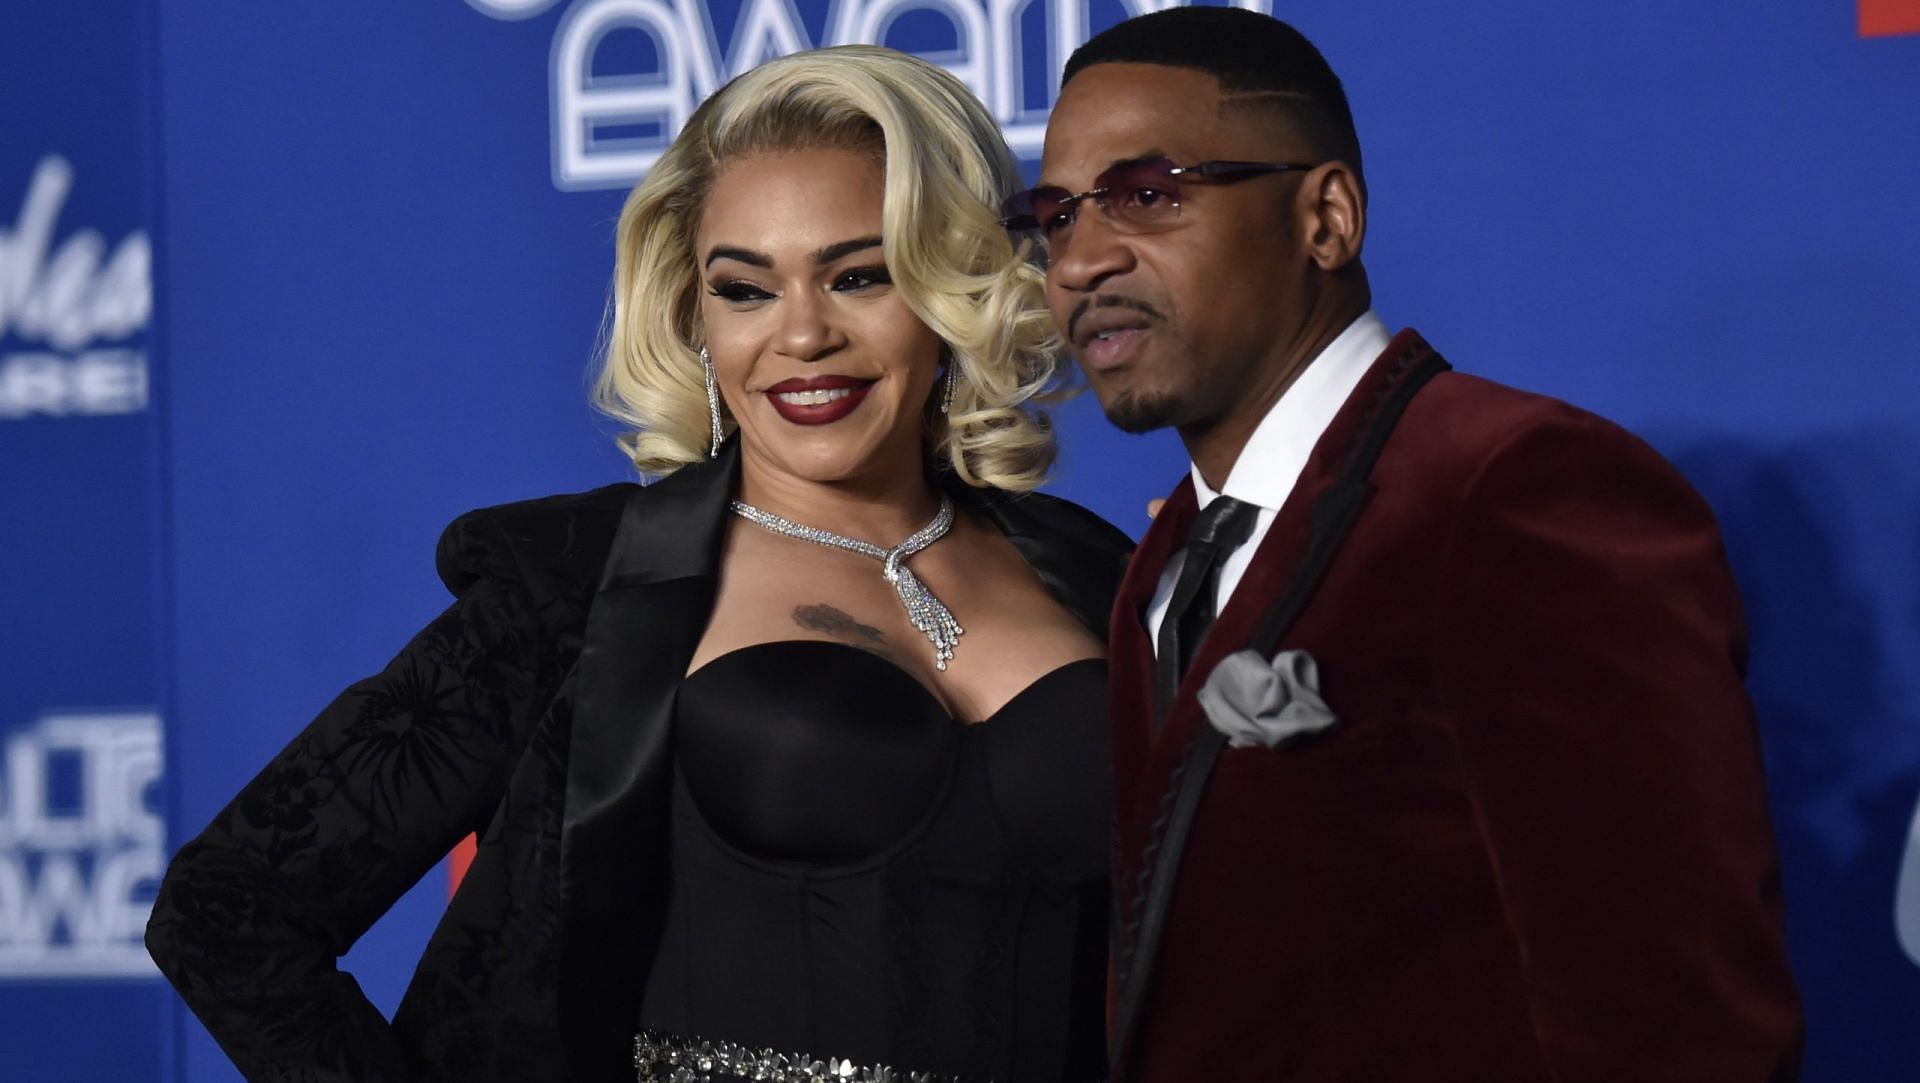 Stevie J and Faith Evans have decided to call it quits after three years of marriage (Image via Getty Images)